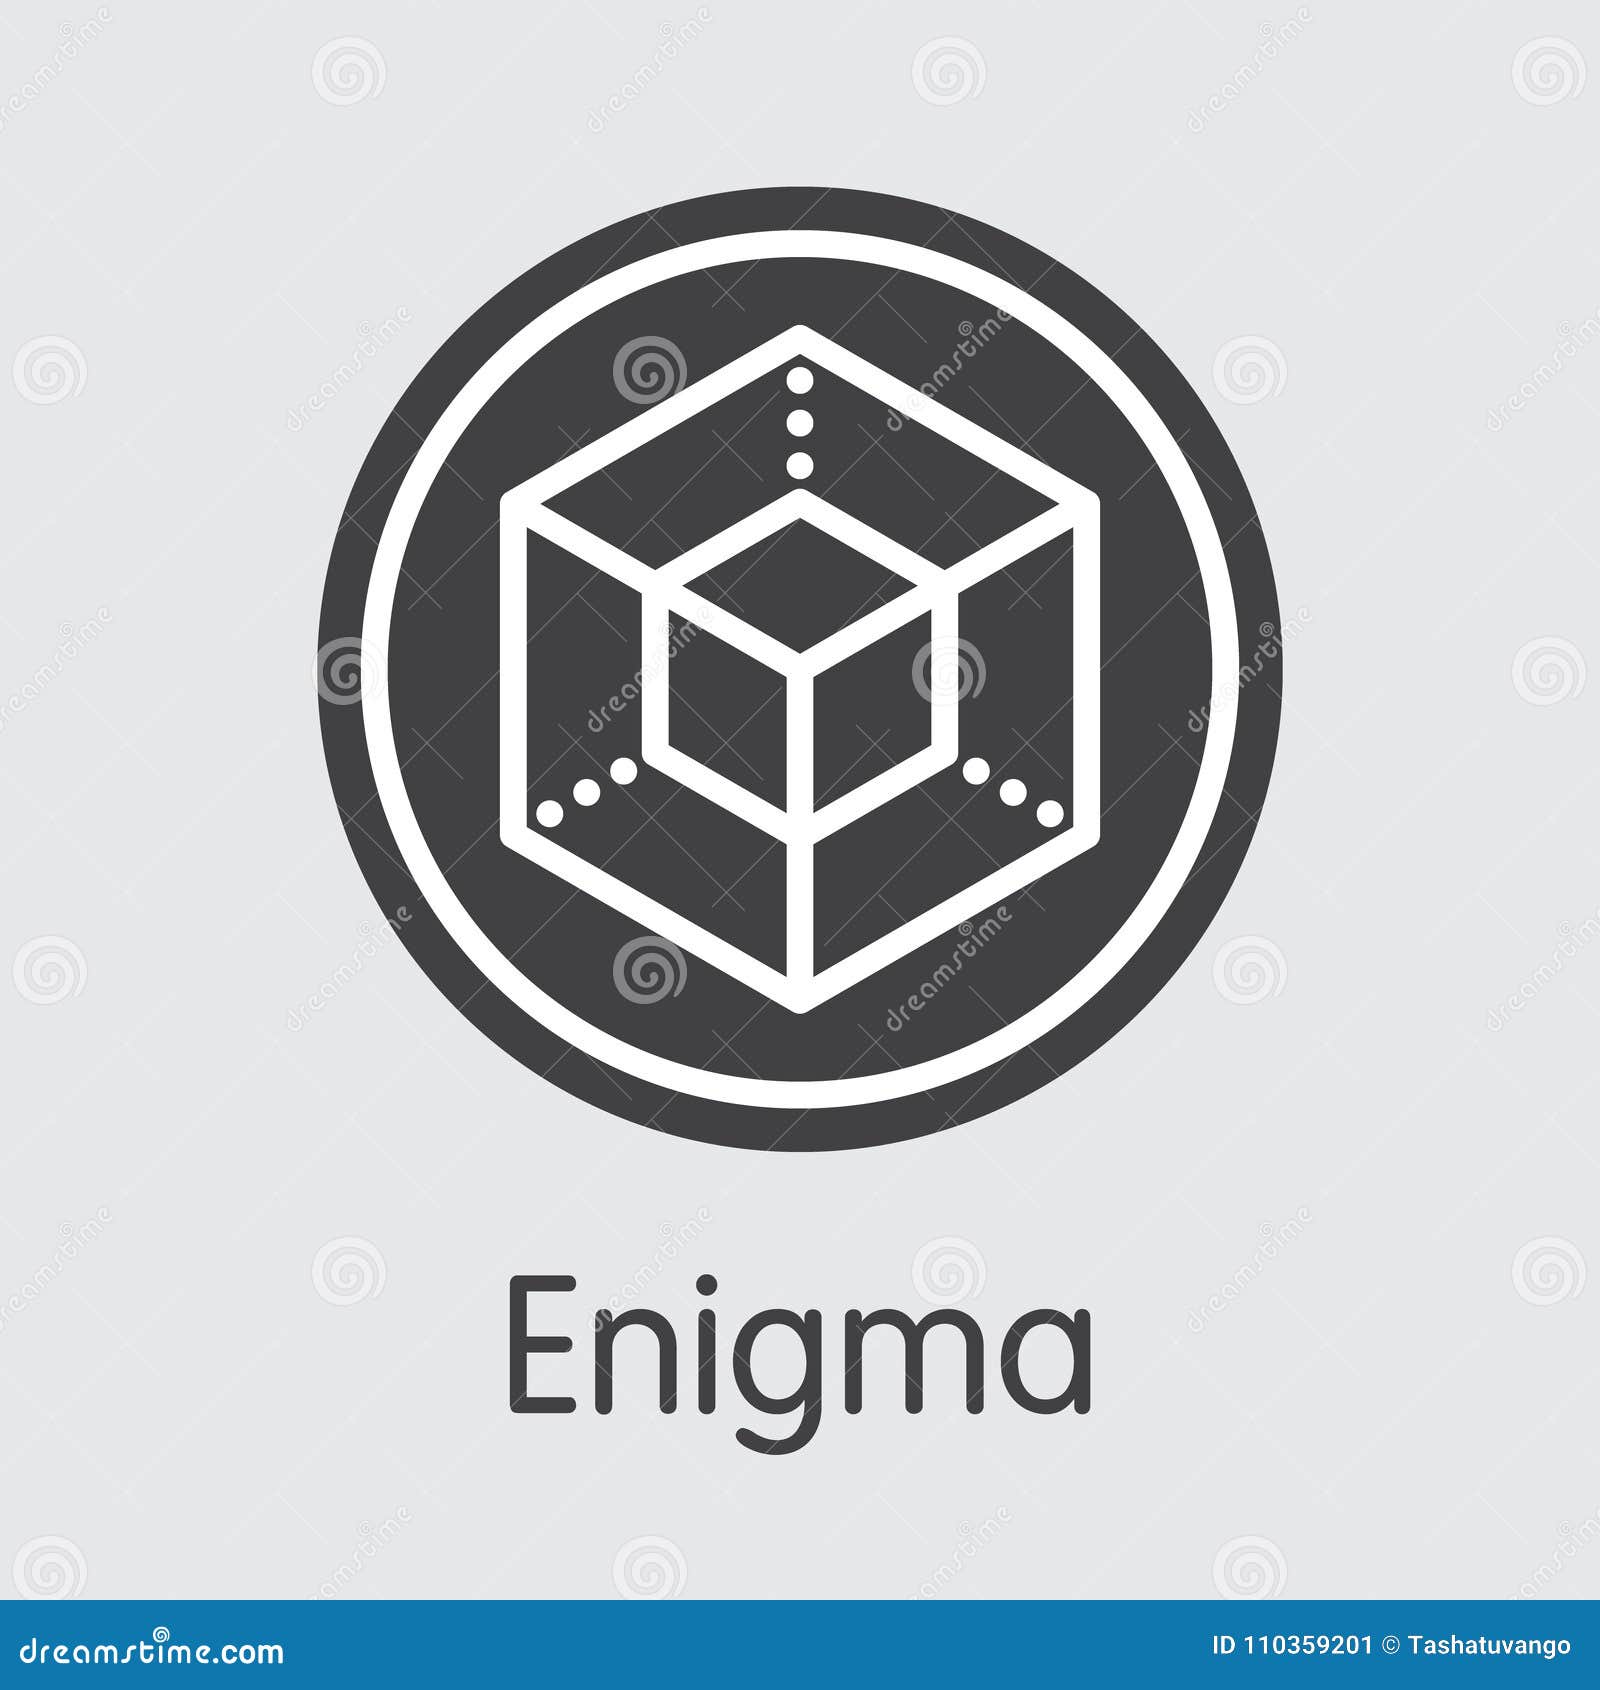 enigma - cryptocurrency .